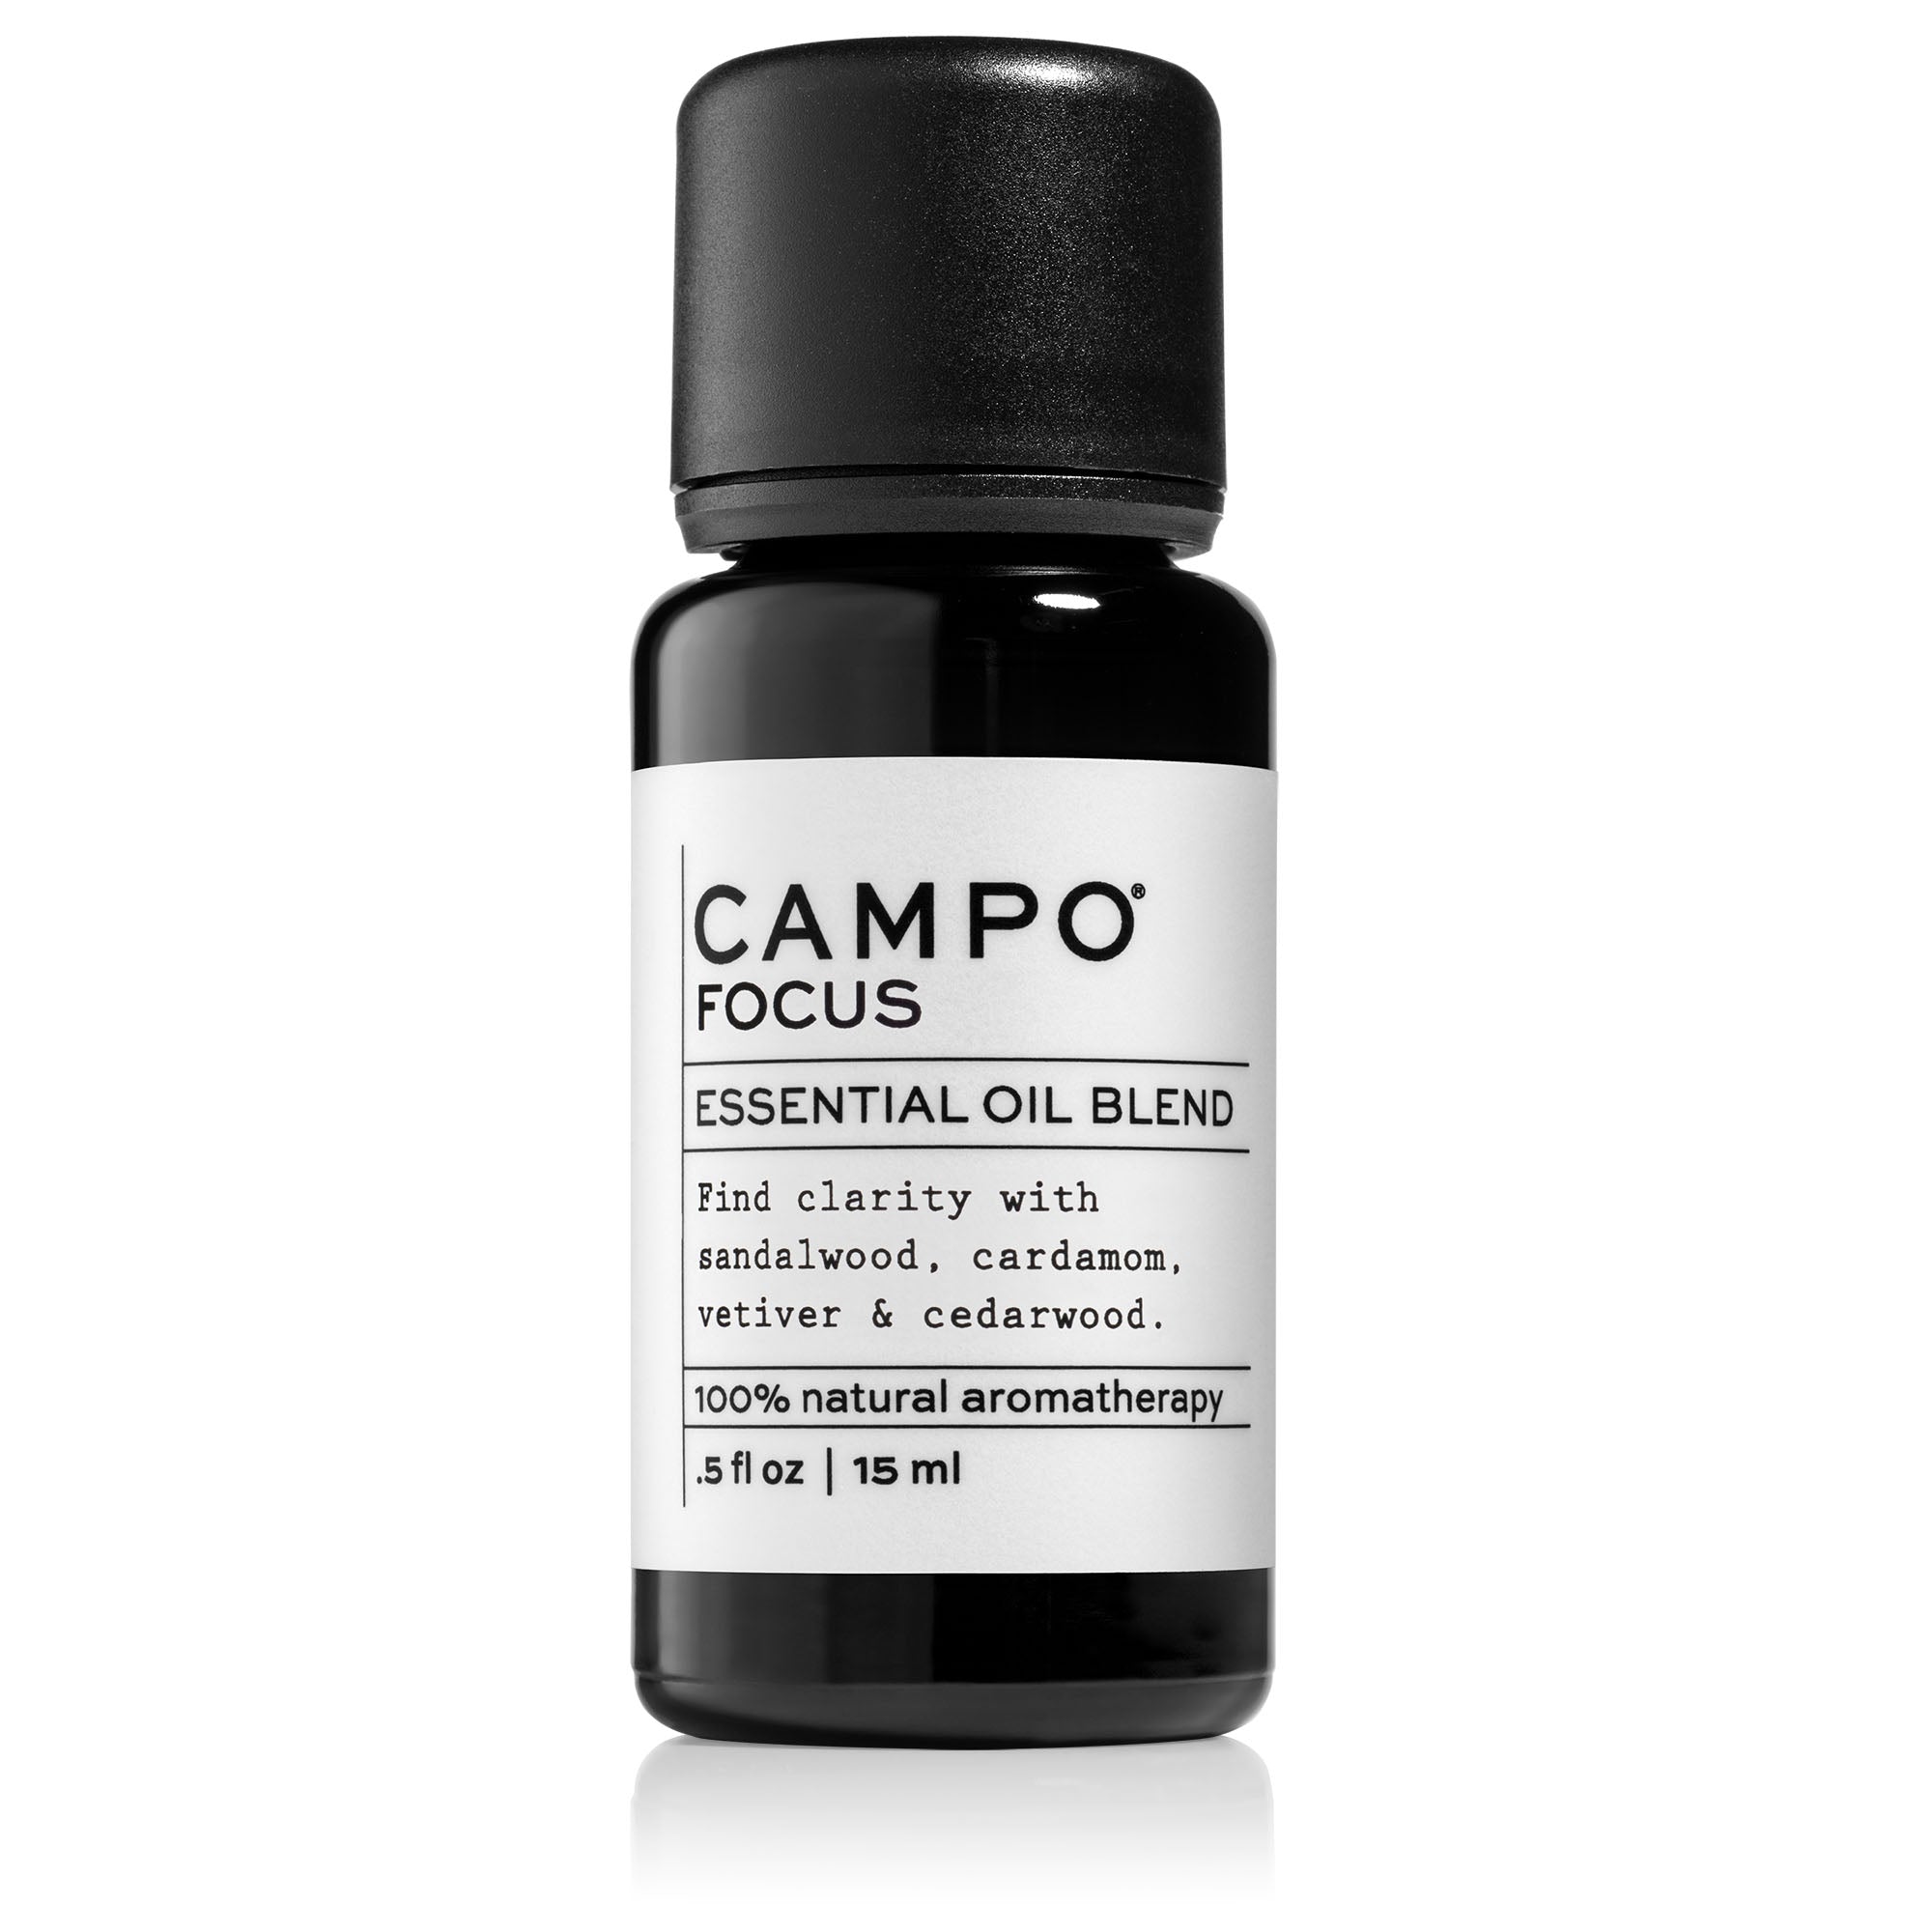 Campo Beauty FOCUS Blend 15 ml Essential Oil. Inspires feelings of peace and tranquility to promote heightened awareness and mental clarity.  A grounding blend of 100% pure essential oils of warm, woodsy Australian Sandalwood, Cardamom, Vetiver, Cedarwood Virginia, Cedarwood Texas, Cedarwood Himalayan, and Cedarwood Atlas.